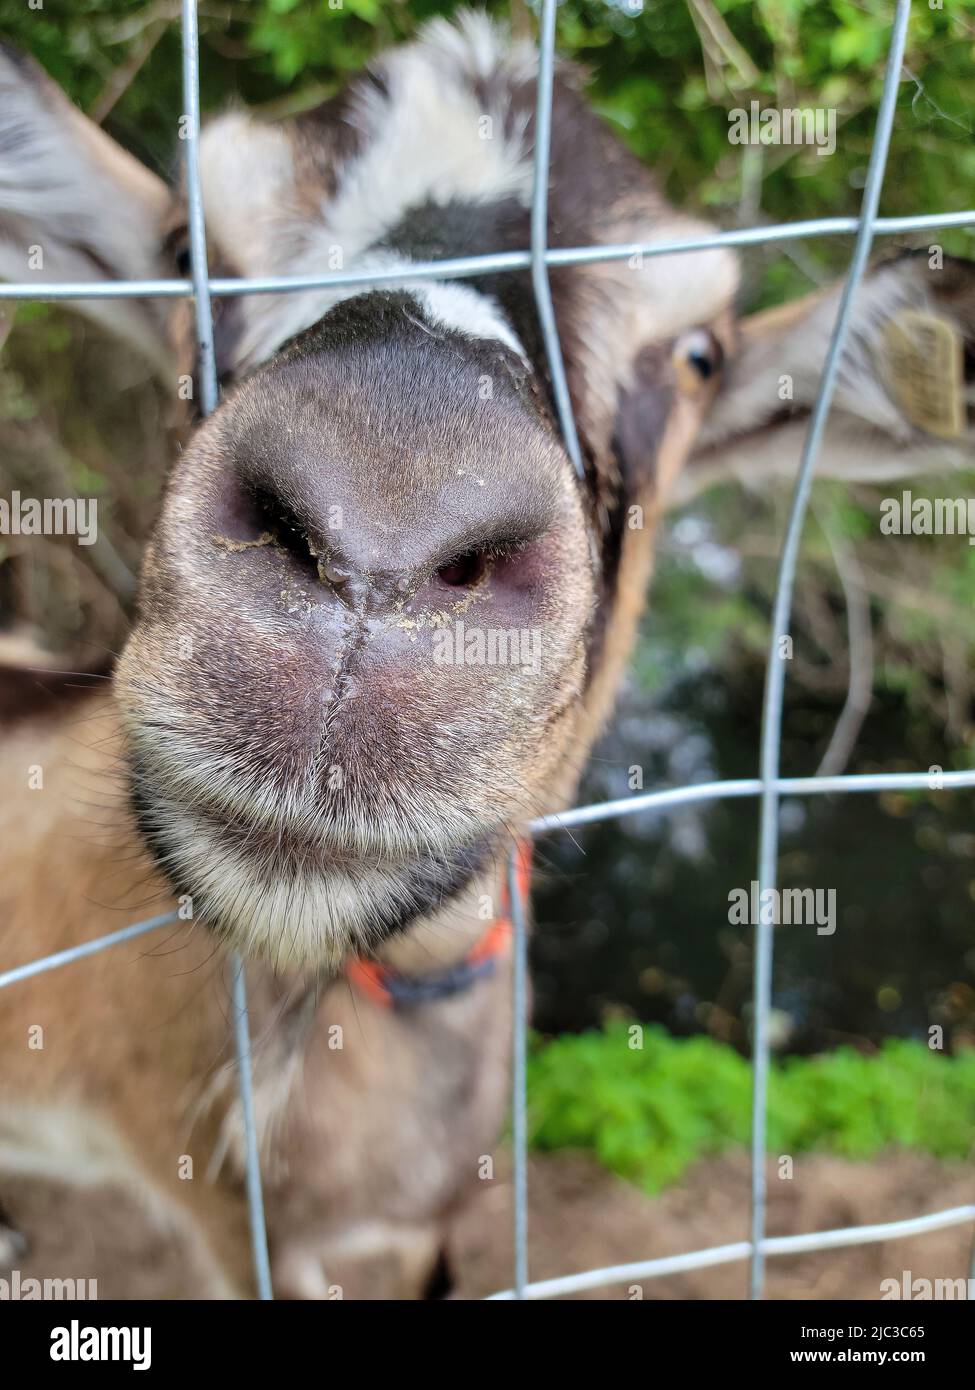 Extreme close up of a goat nose in a wire fence Stock Photo